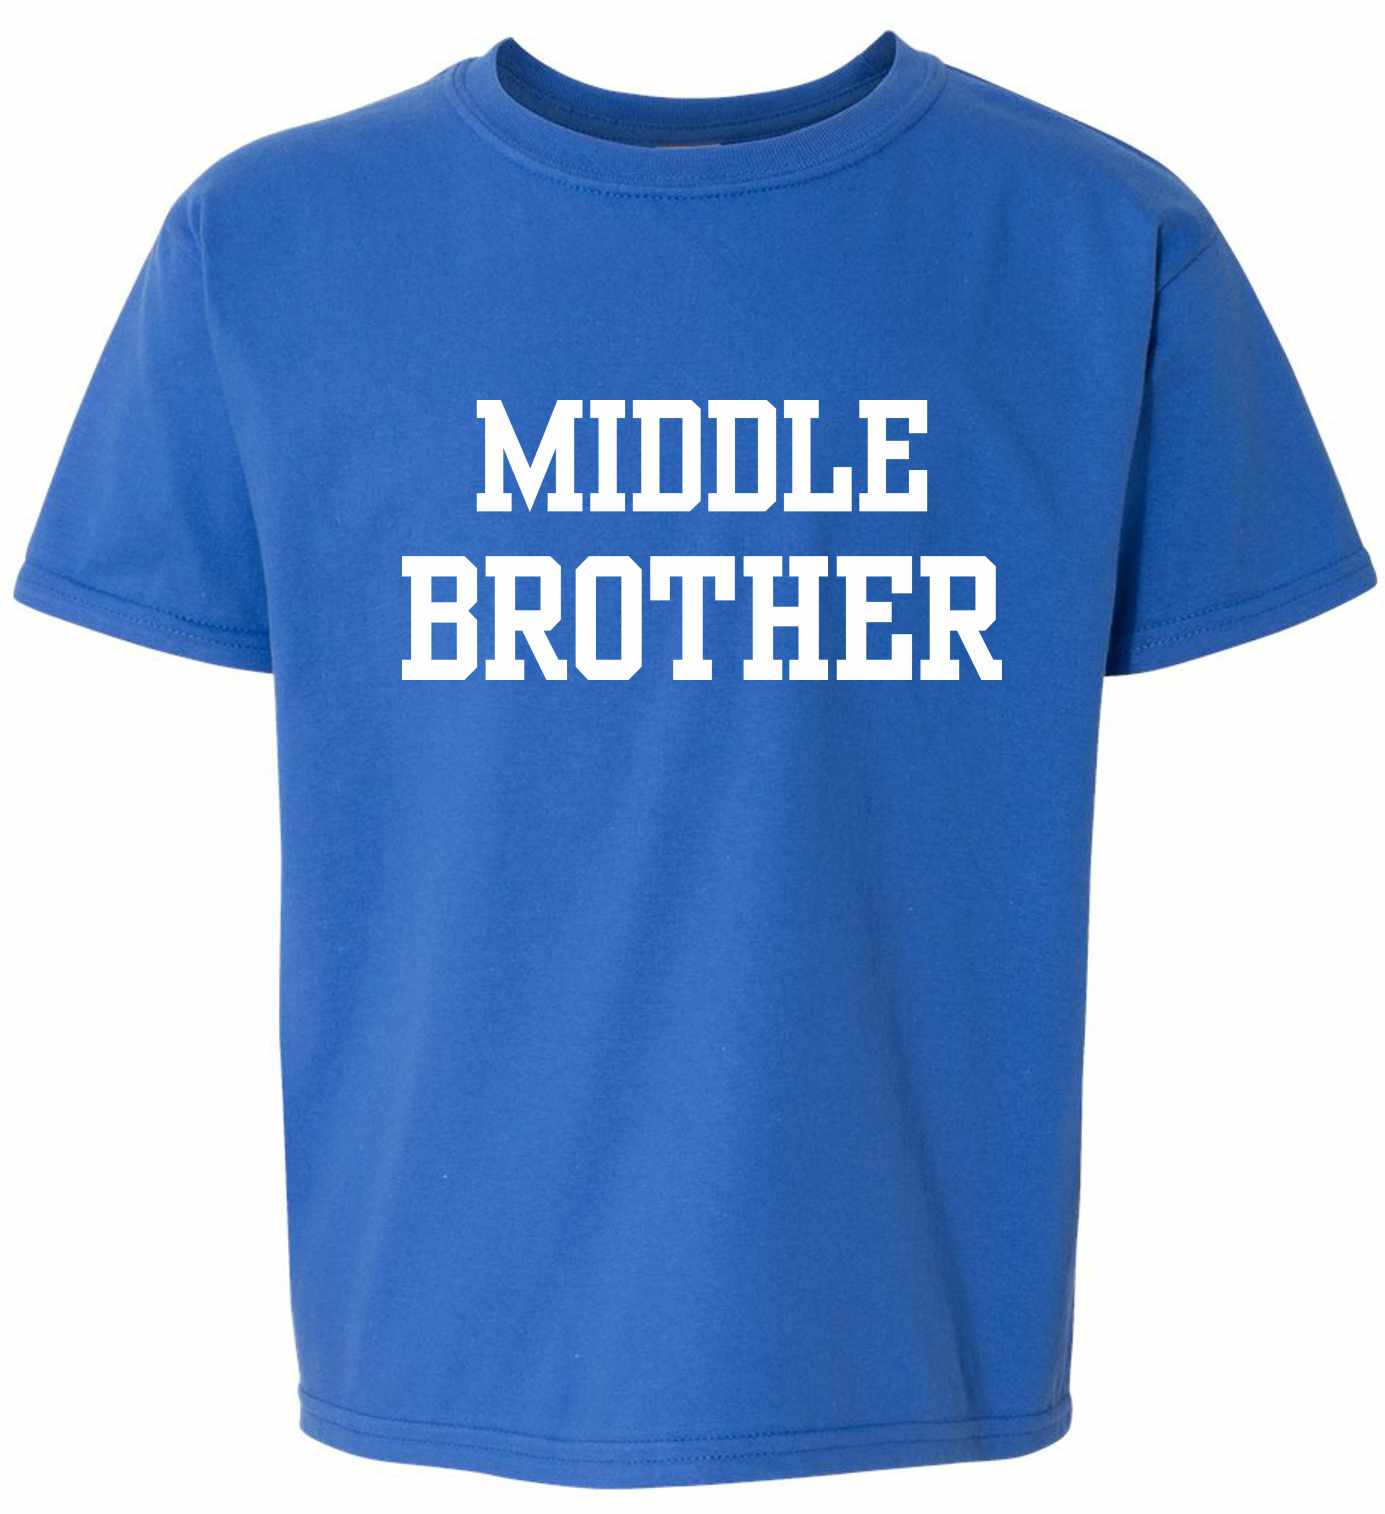 MIDDLE BROTHER on Kids T-Shirt (#1112-201)